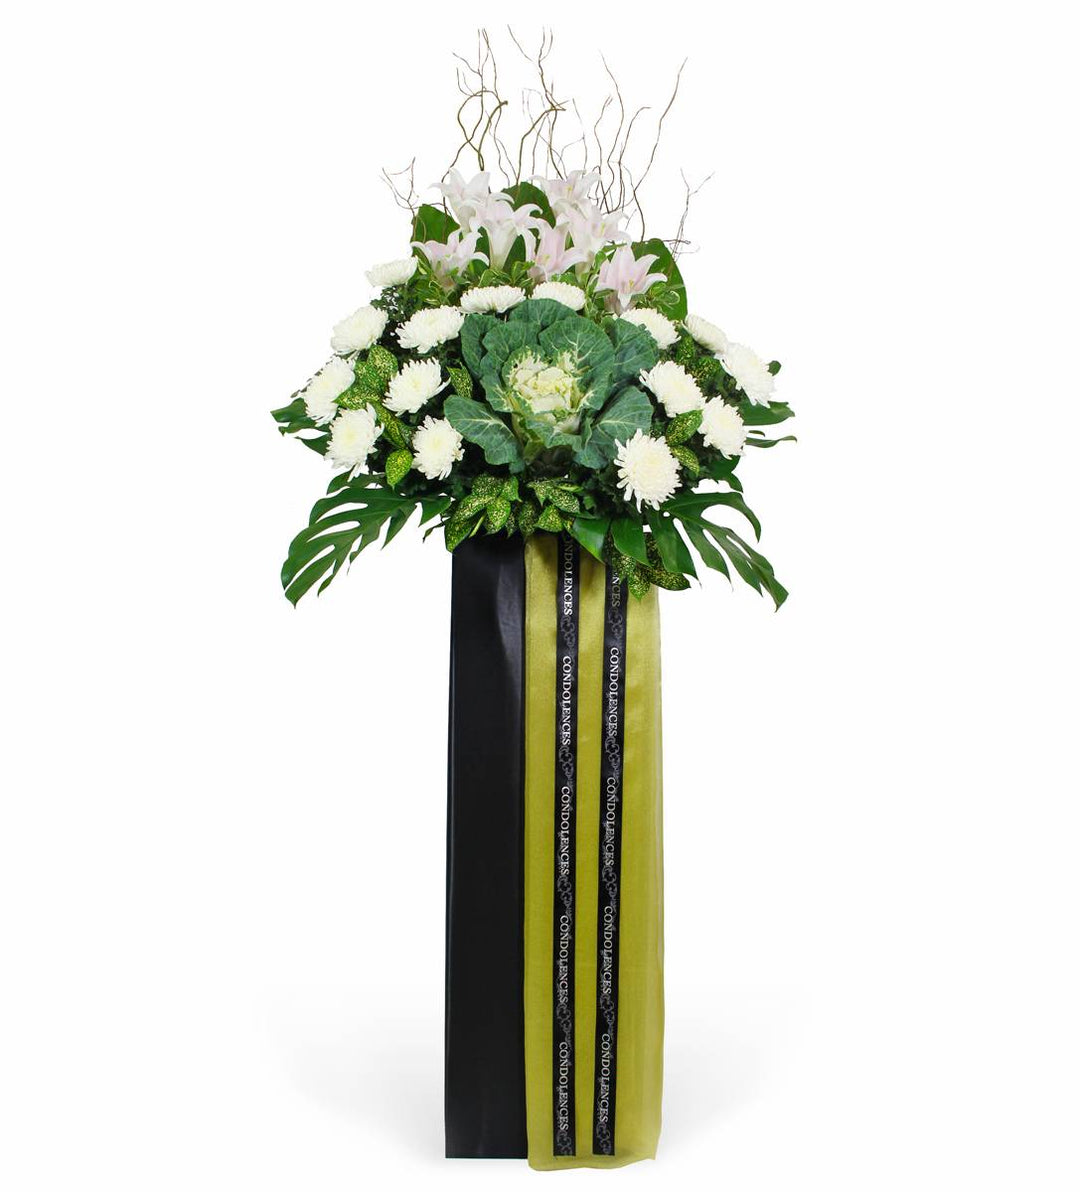 flowerstand-dragonwillow-lily-brassica-chrysanthemum-front